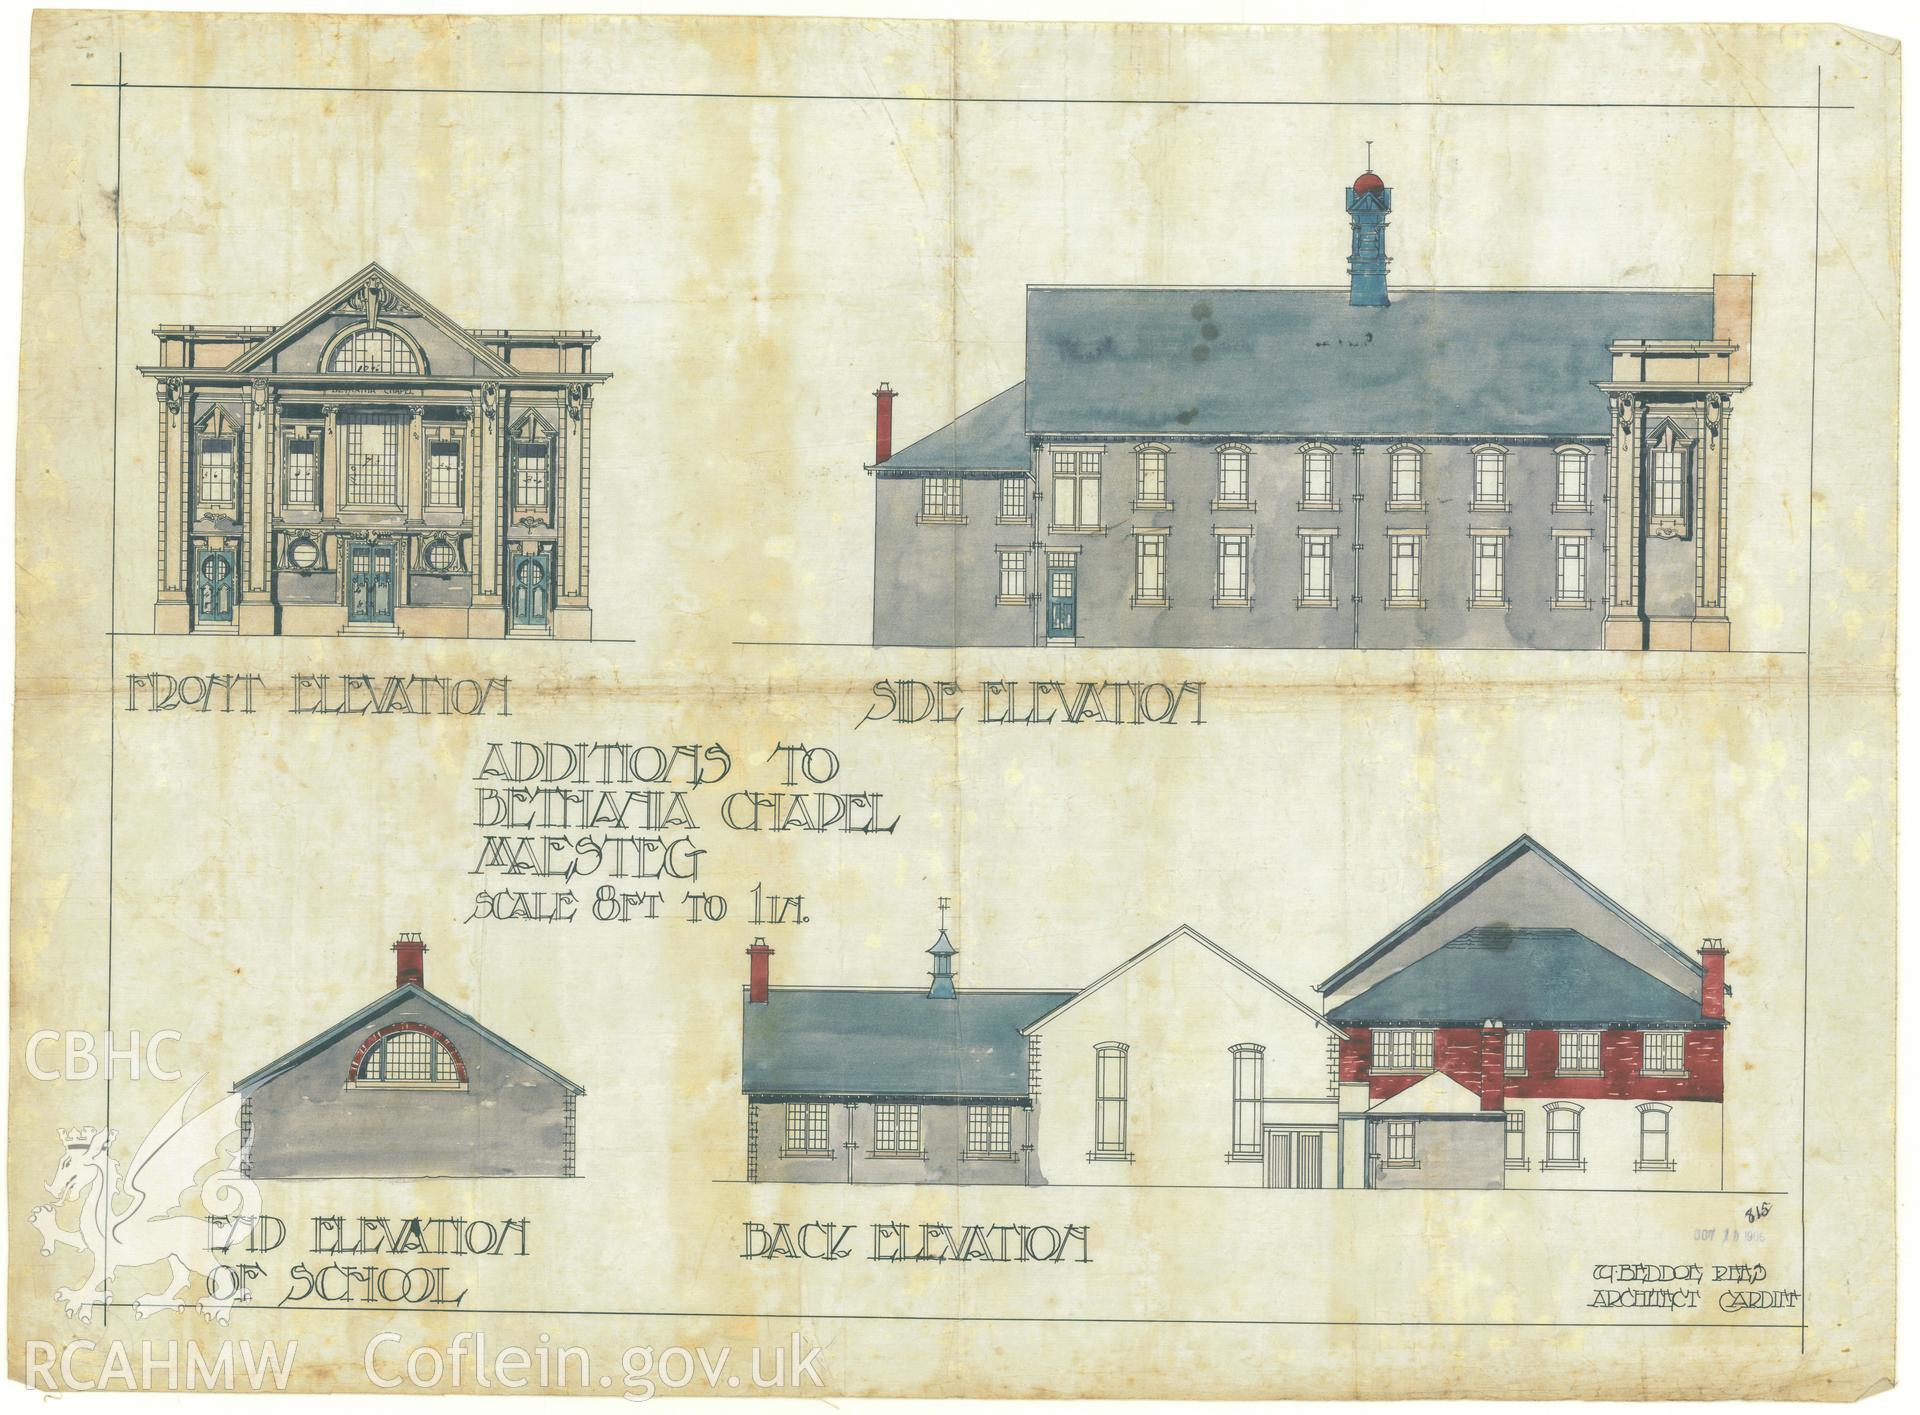 Digitized copy of a coloured pen and ink drawing by W. Beddoe Rees, dated 1906, showing elevation views of Bethania Chapel, Maesteg. One of a set of original architectural drawings of Bethania Chapel, Maesteg, loaned for copying by their owners, the Welsh Religious Buildings Trust. The original drawings are held by the Glamorgan Record Office.